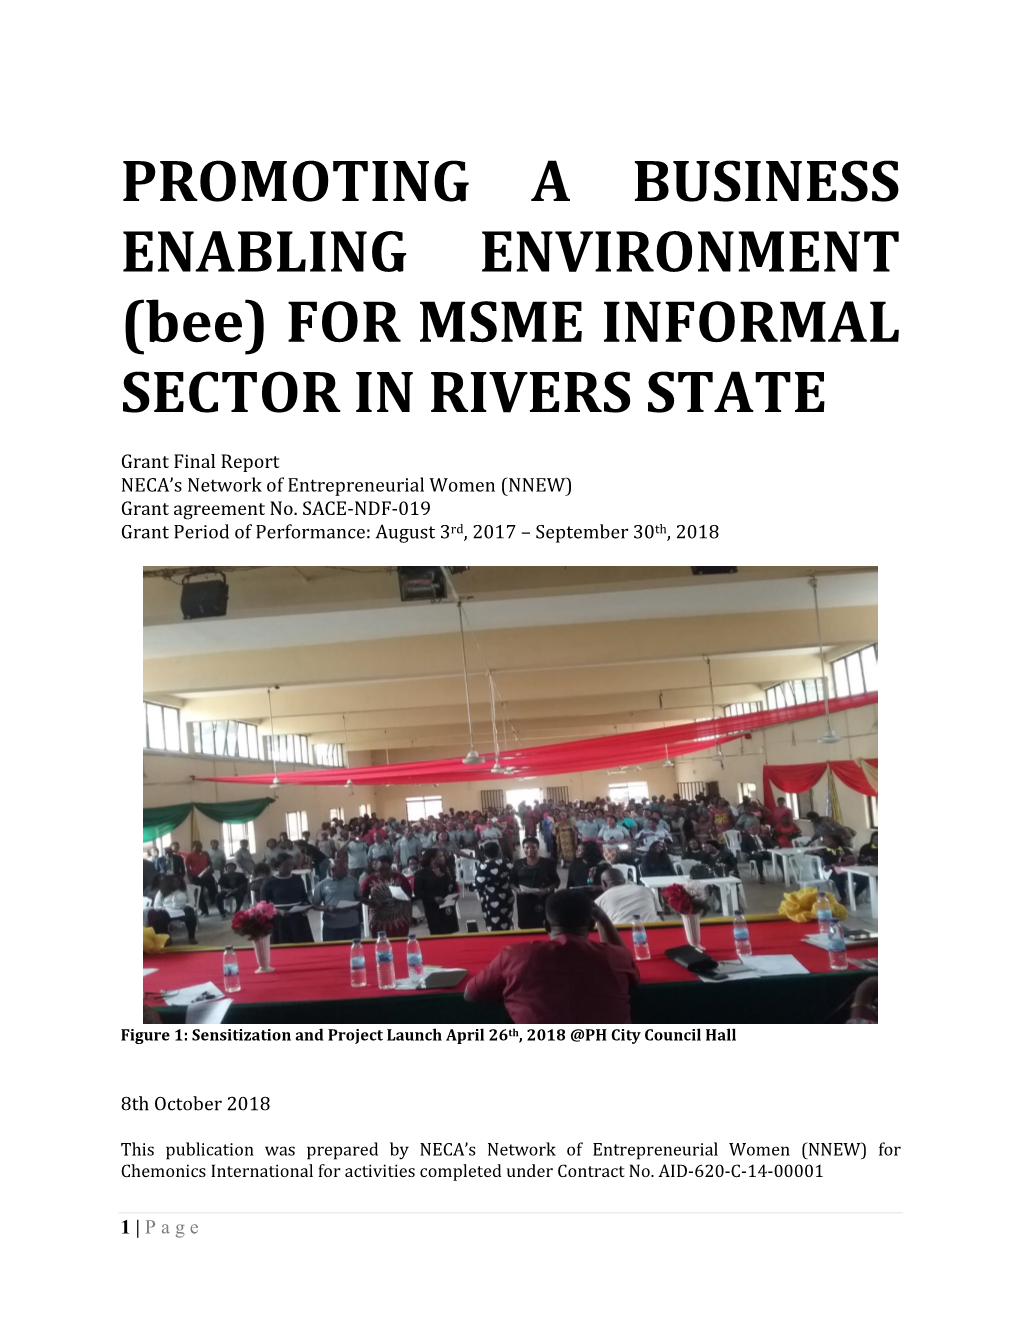 (Bee) for MSME INFORMAL SECTOR in RIVERS STATE